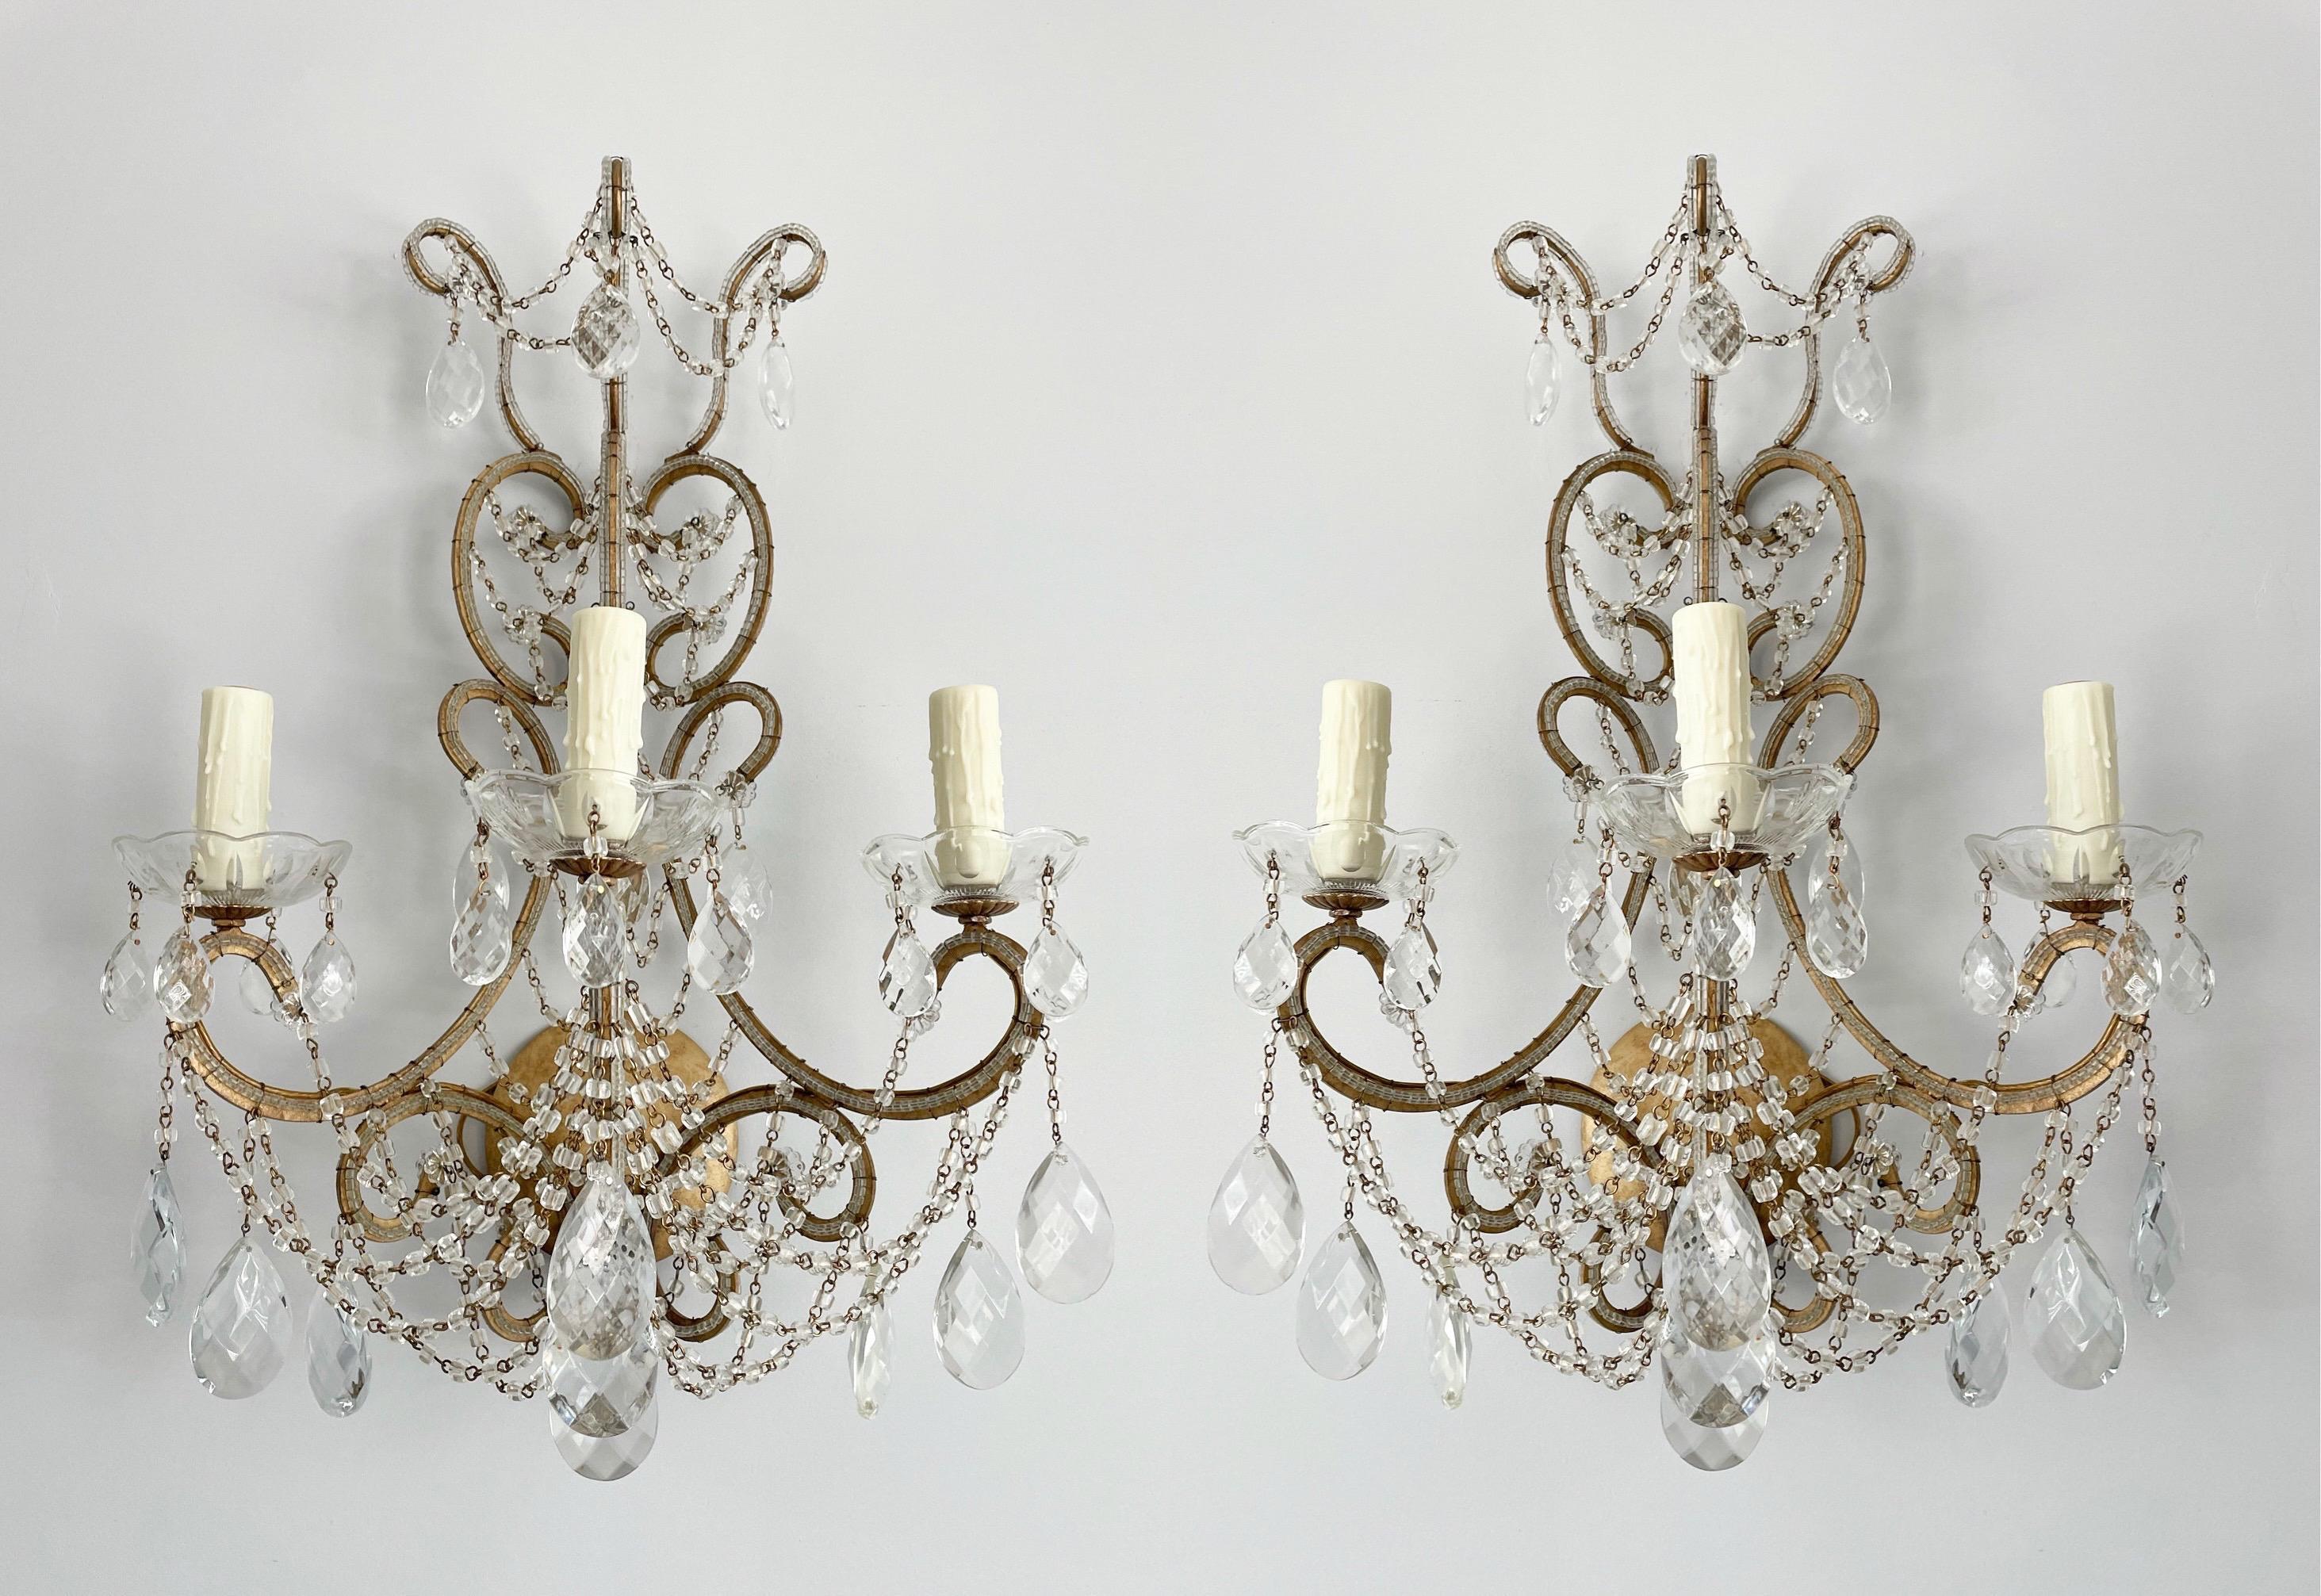 Graceful, vintage Italian pair of gilt-iron and crystal beaded sconces.

Each sconce consists of a scrolled-iron frame outlined with glass beads and decorated with an abundance of macaroni bead swags and faceted prisms. 

The sconces are wired